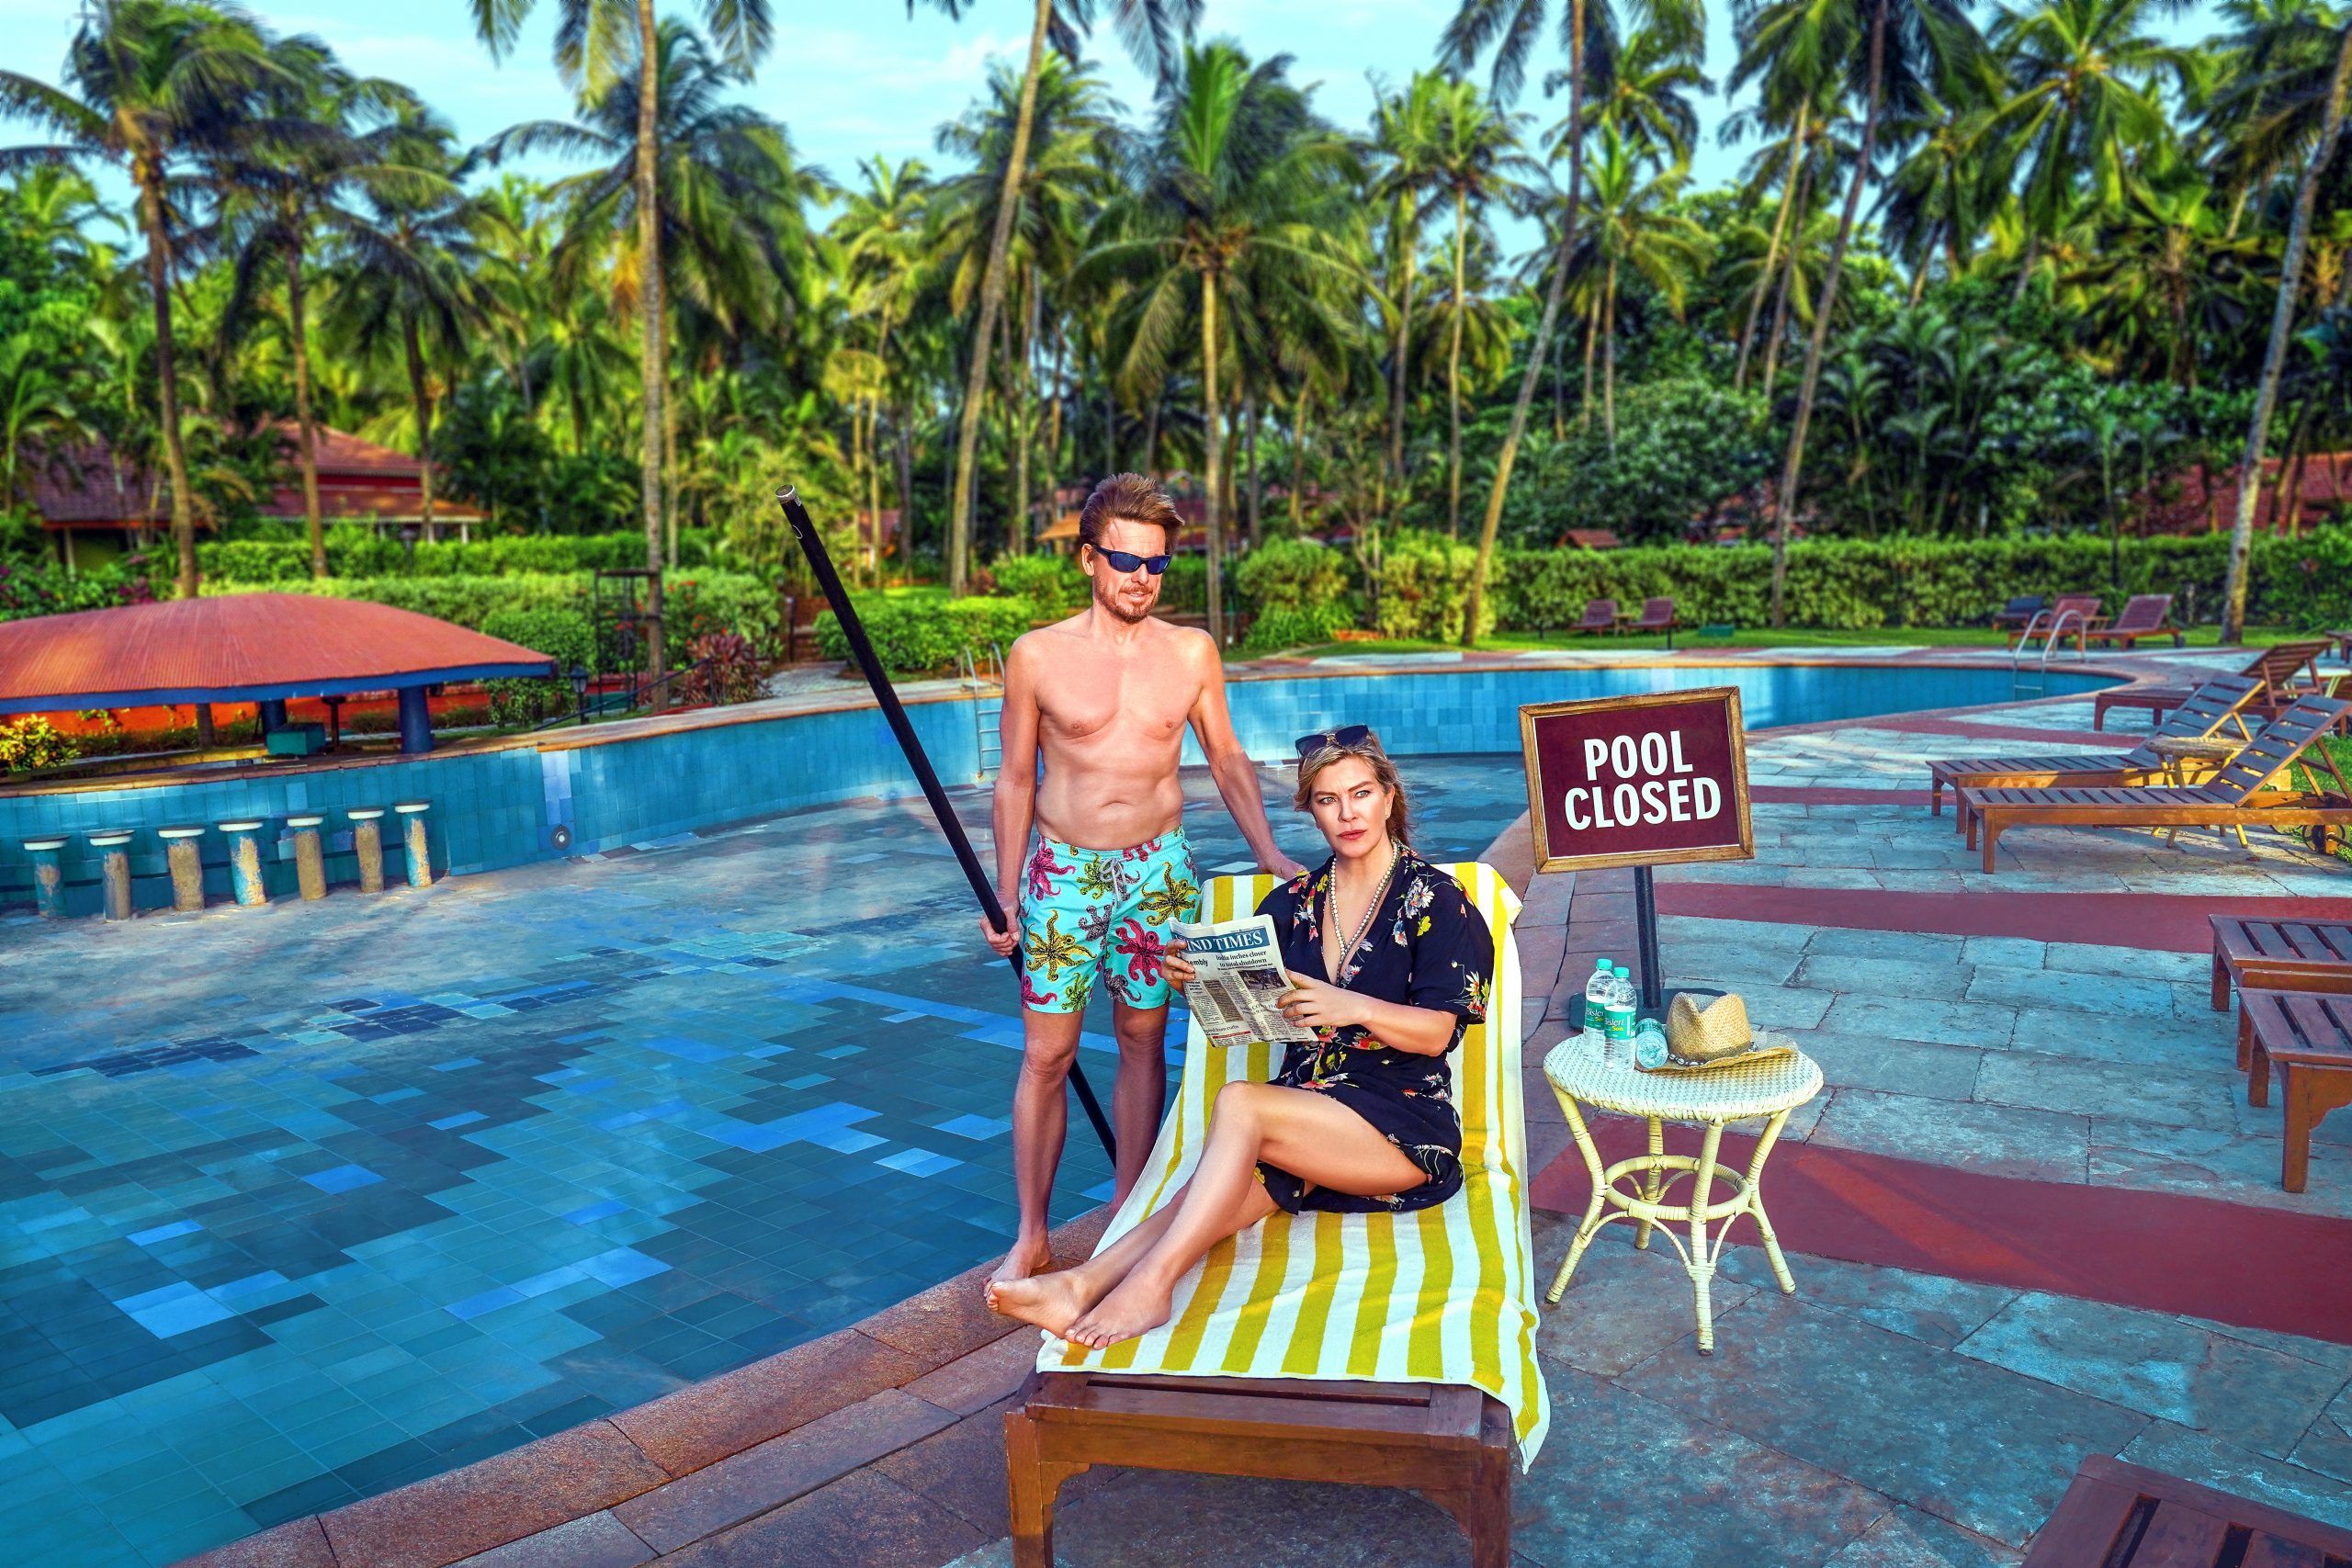 Trapped on their travels: Heartbreak hotel – Marriage plans a no-Goa for now 